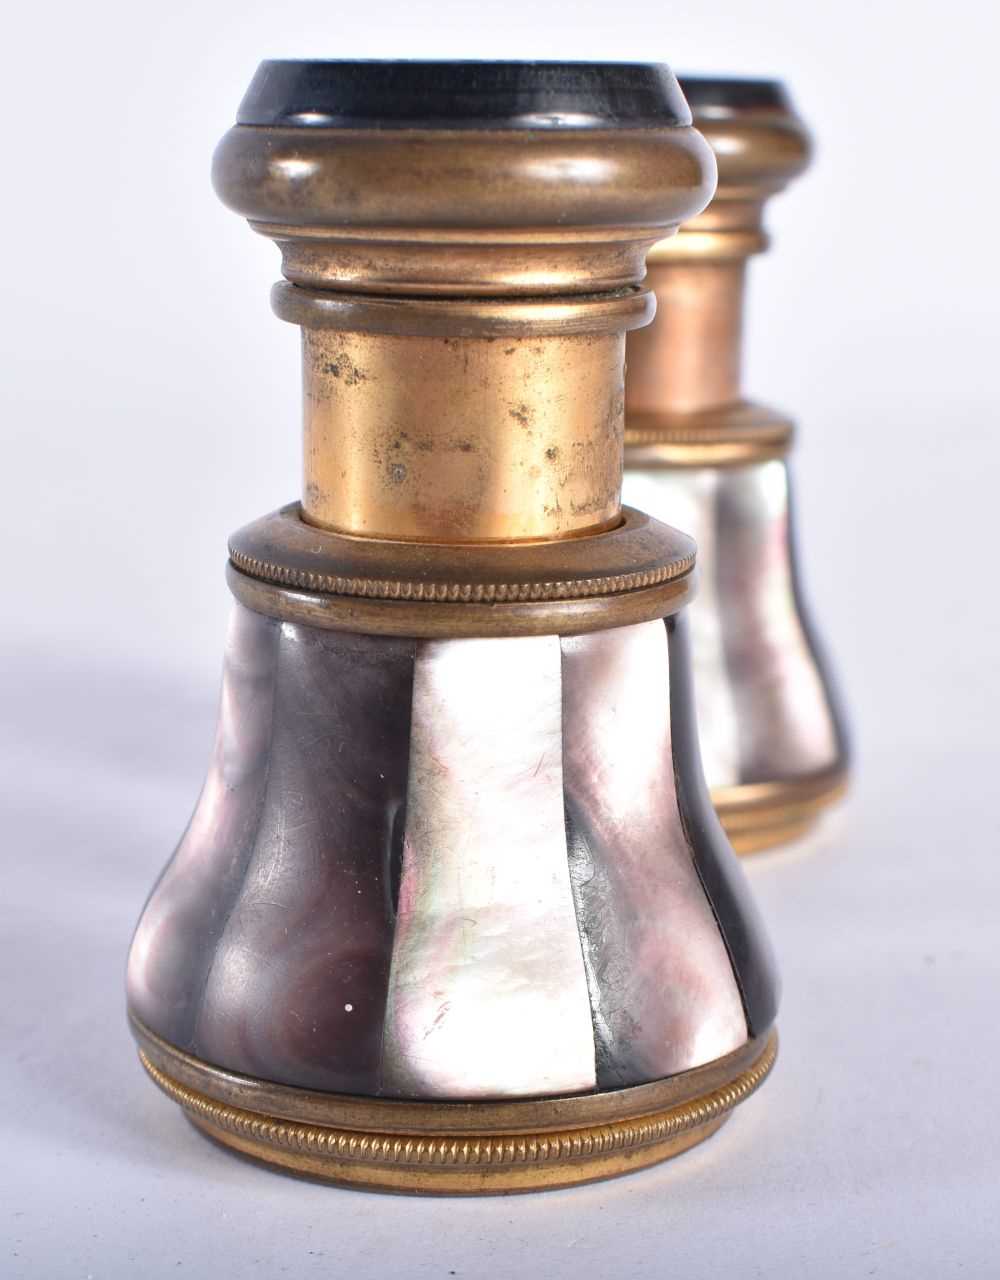 A PAIR OF MOTHER OF PEARL OPERA GLASSES. 6 cm x 10 cm extended. - Image 2 of 5